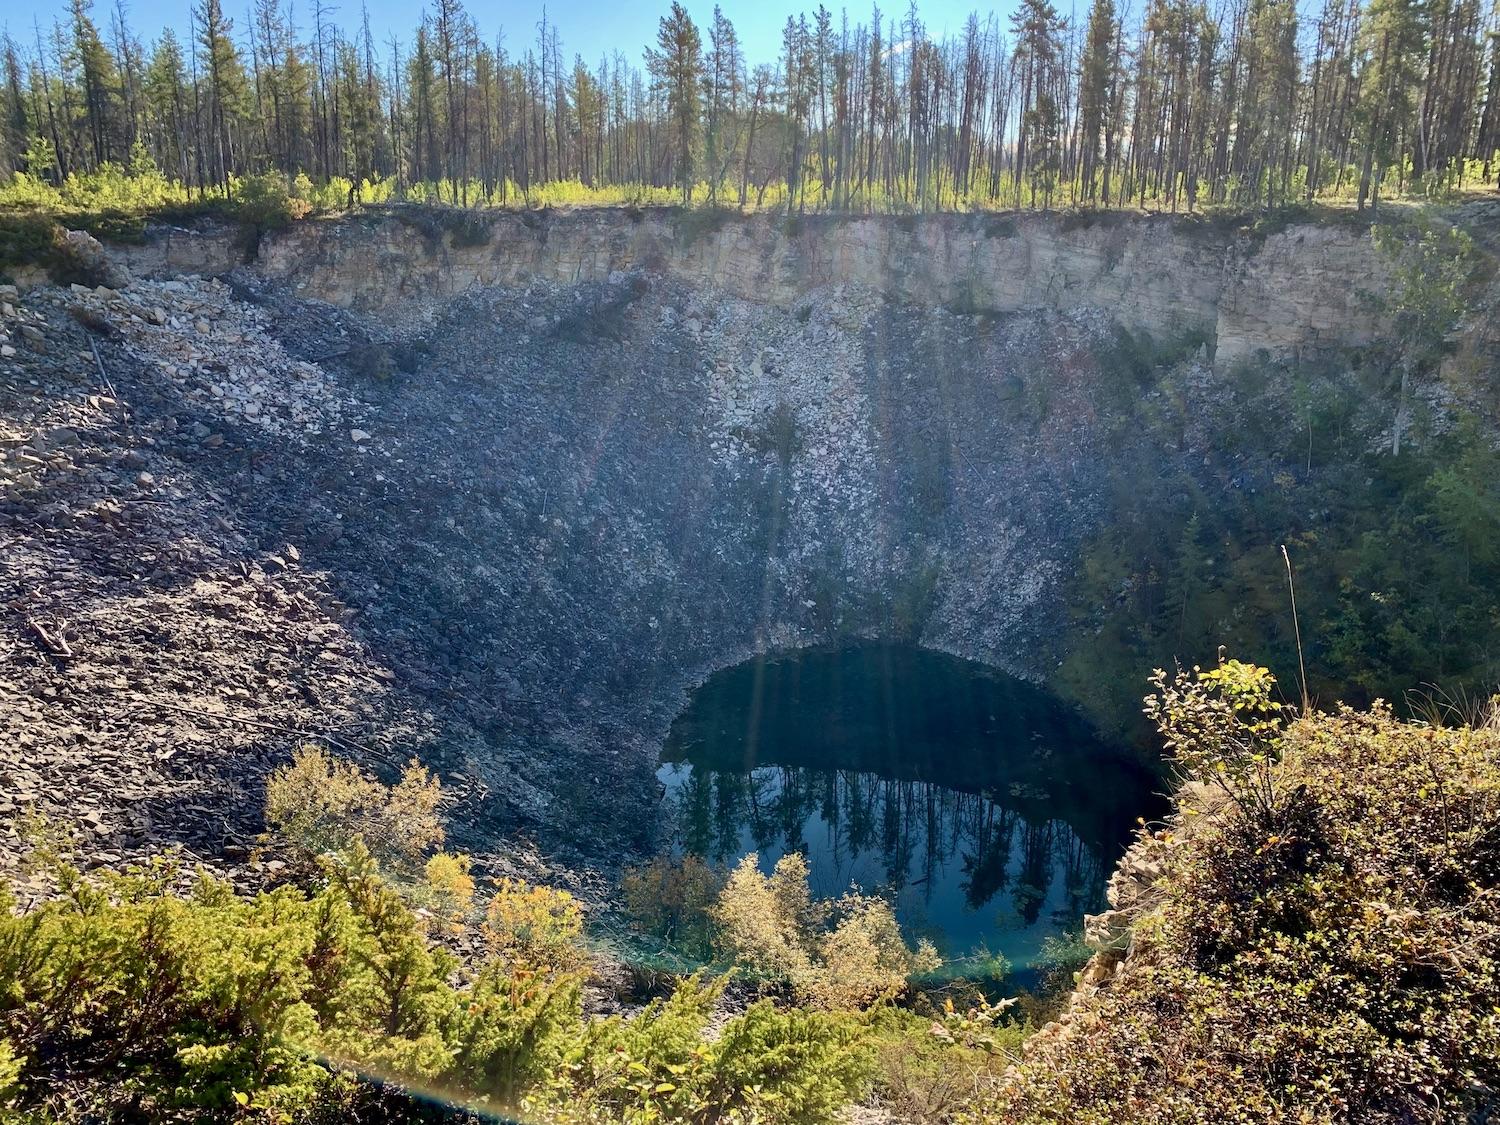 The Angus Sinkhole has interpretive signs and a chain-link fence to keep people safely away.